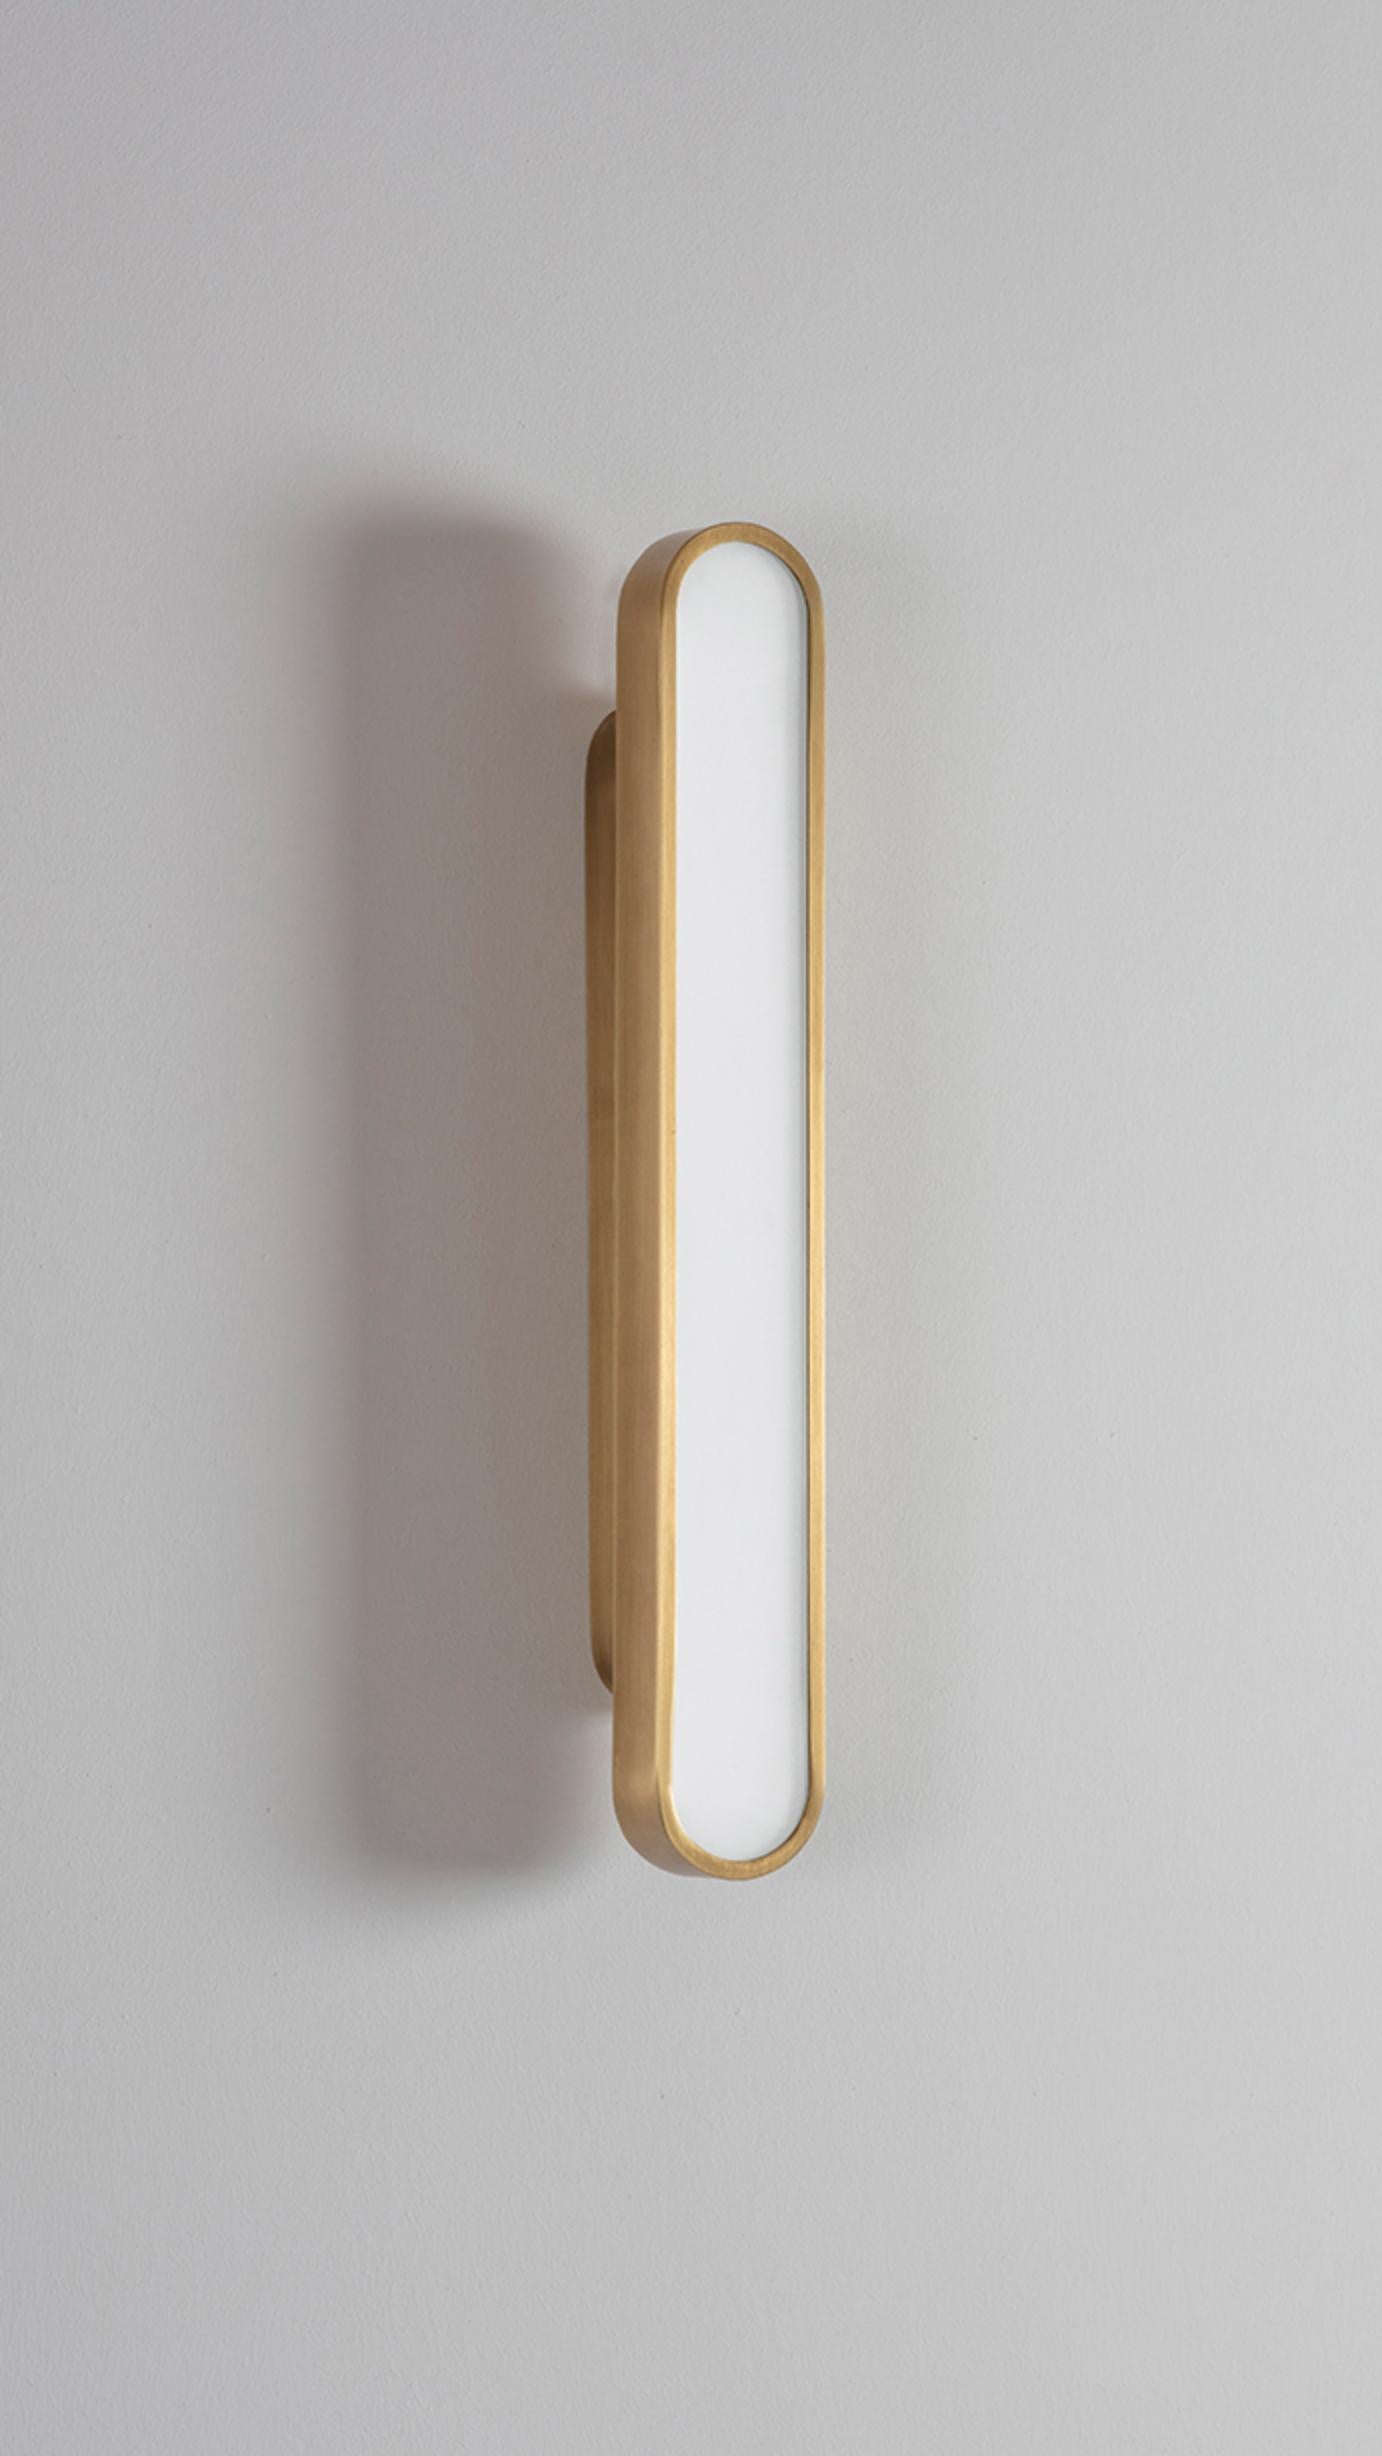 Capsule Golden wall light by Square in Circle
Dimensions: D5 x W5.5 x H40 cm
Materials:Brushed brass/ opaque glass
Other finishes available.

Perfect rounded rectangular shape wall light. Metal wall light is neatly fixed with the same shape